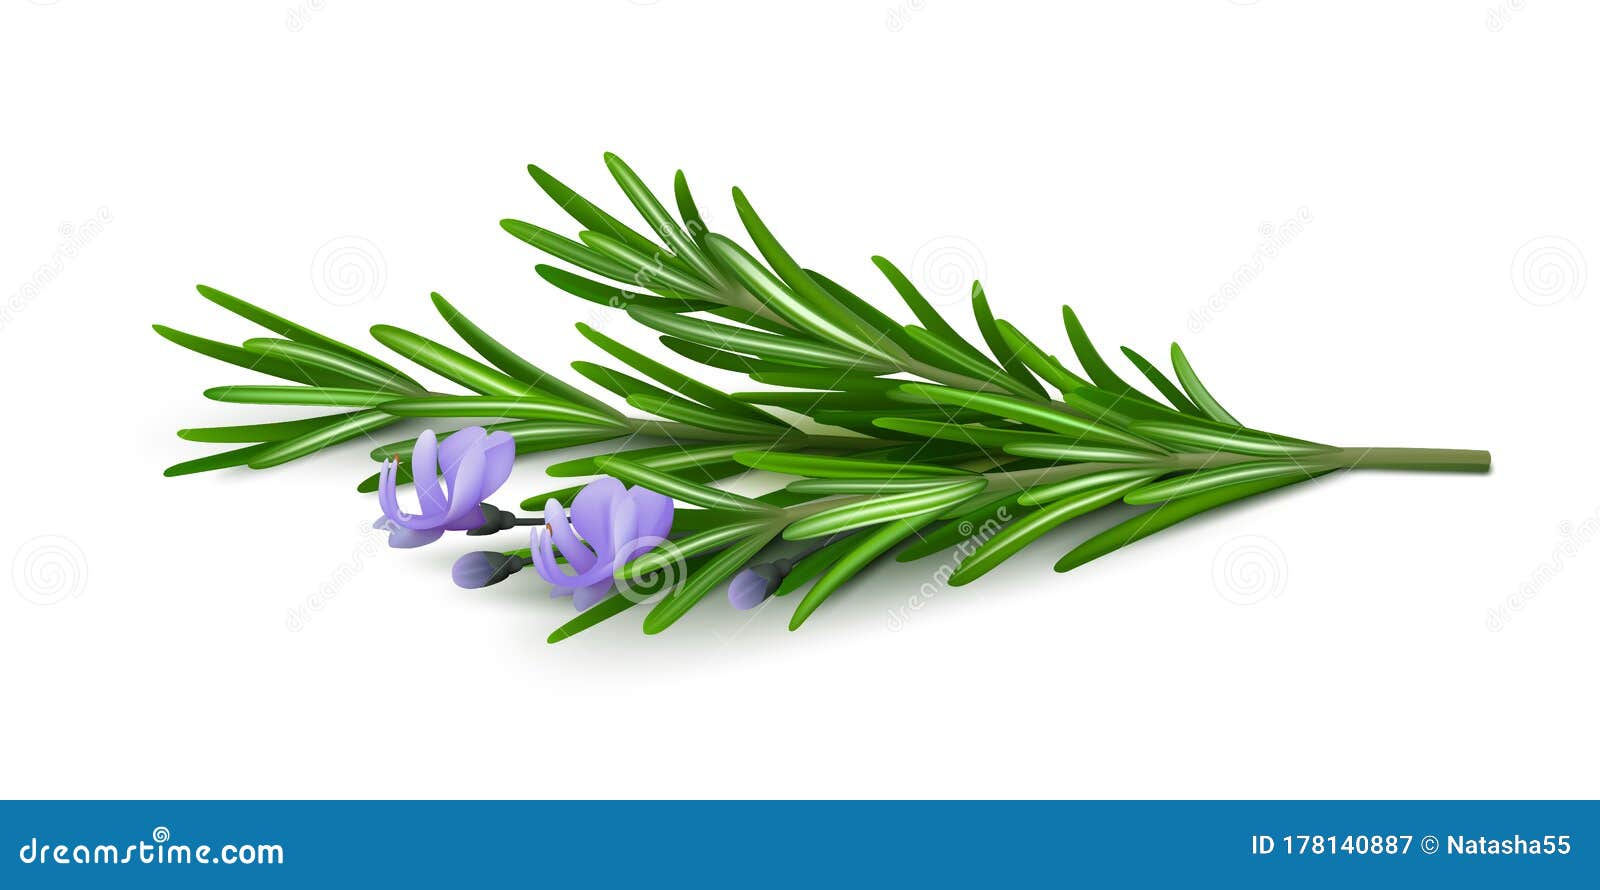 fresh sprig of rosemary with flowers on a white background.